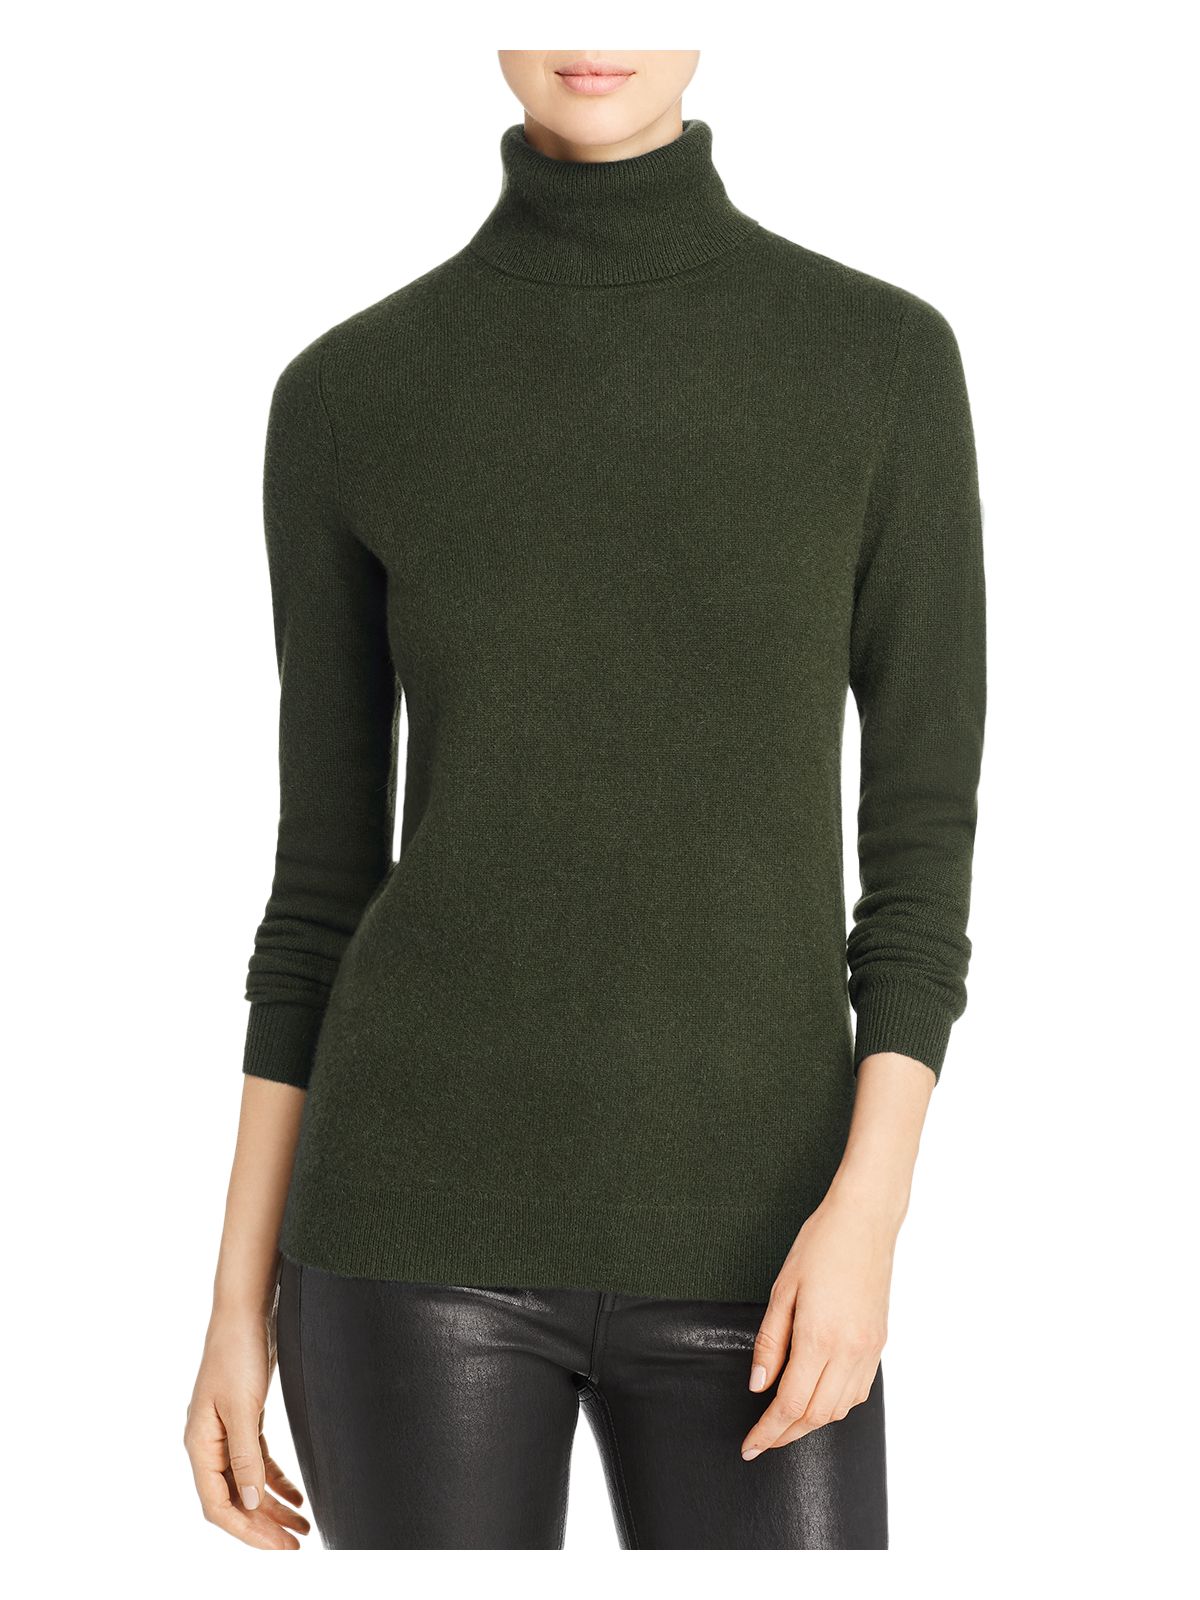 C.CASHMERE Womens Green Long Sleeve Turtle Neck Sweater L